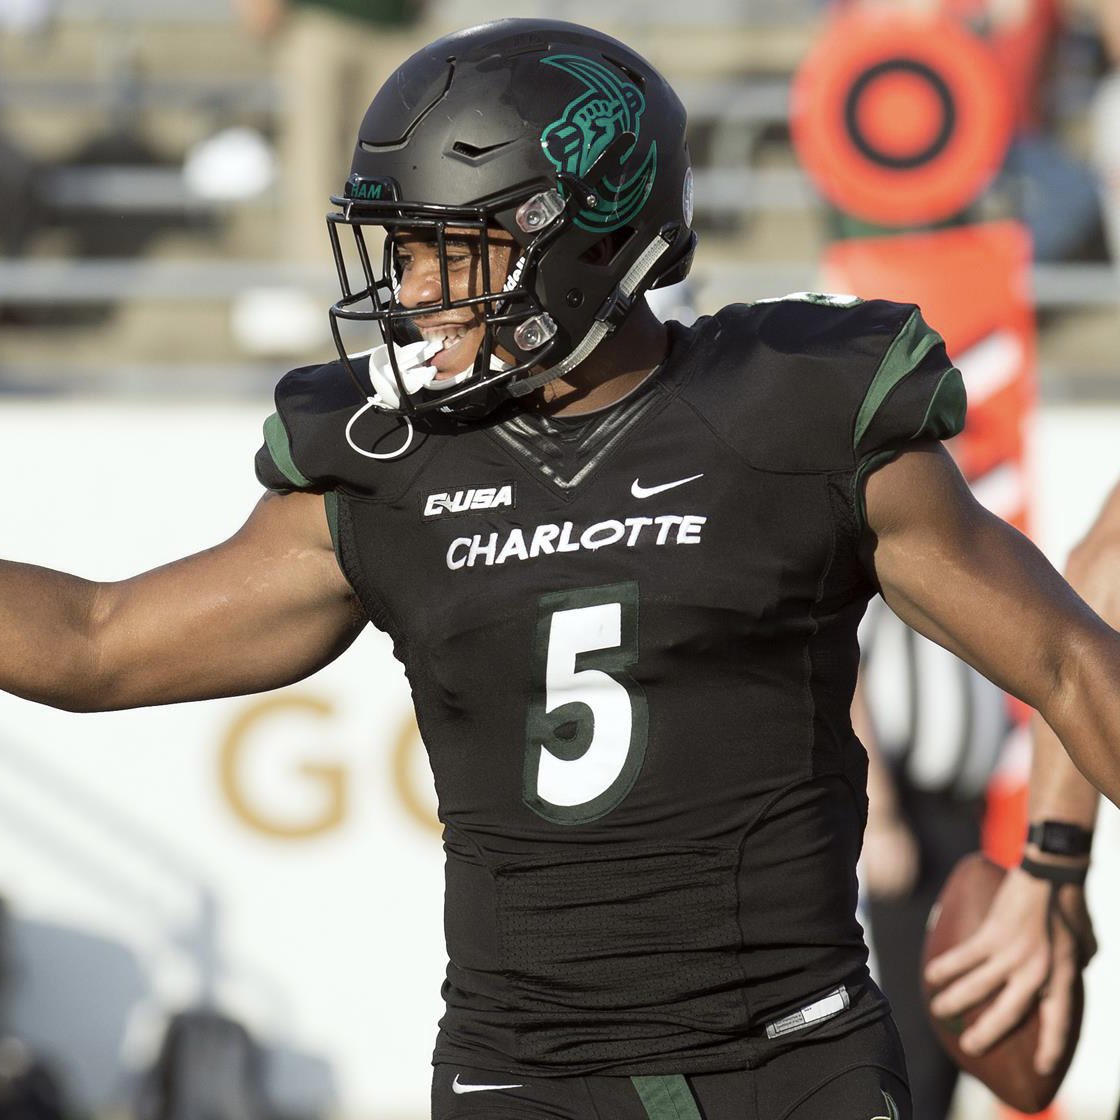 FCD HELMET OF THE DAY 🏈: 
Charlotte ⚫️

The 49ers have one of the more underrated helmets in all of FBS. 

These blackout lids from the 2018/2019 seasons are my favorite alternate of theirs! 

#BadCompany⛏ | #AmericanPower